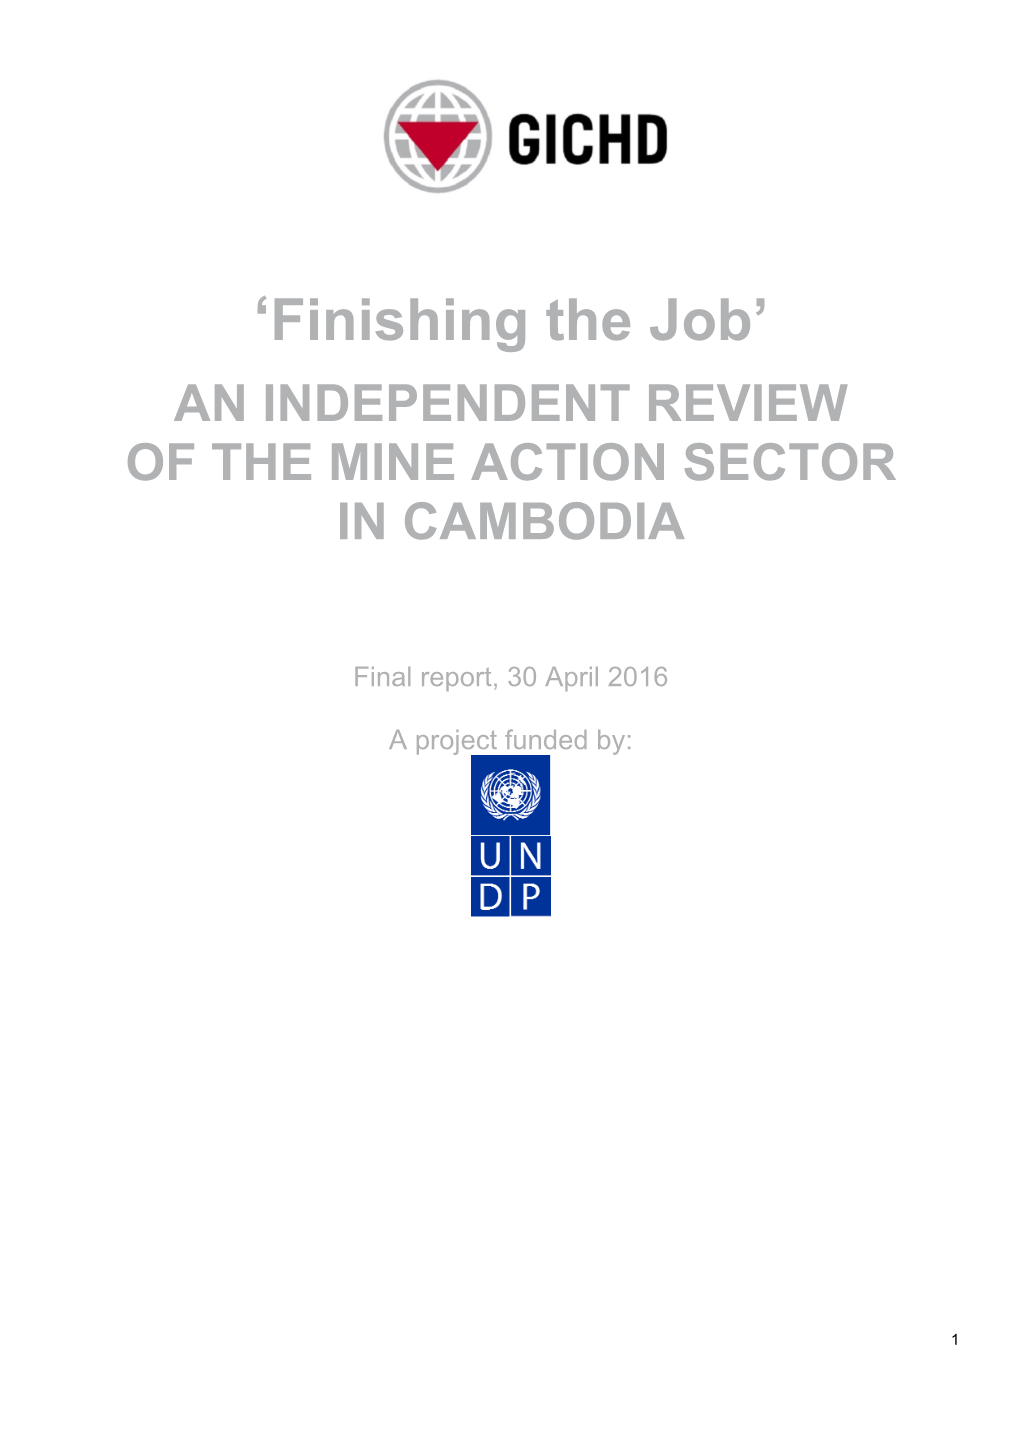 Finishing the Job: an Independent Review of the Mine Action Sector in Cambodia